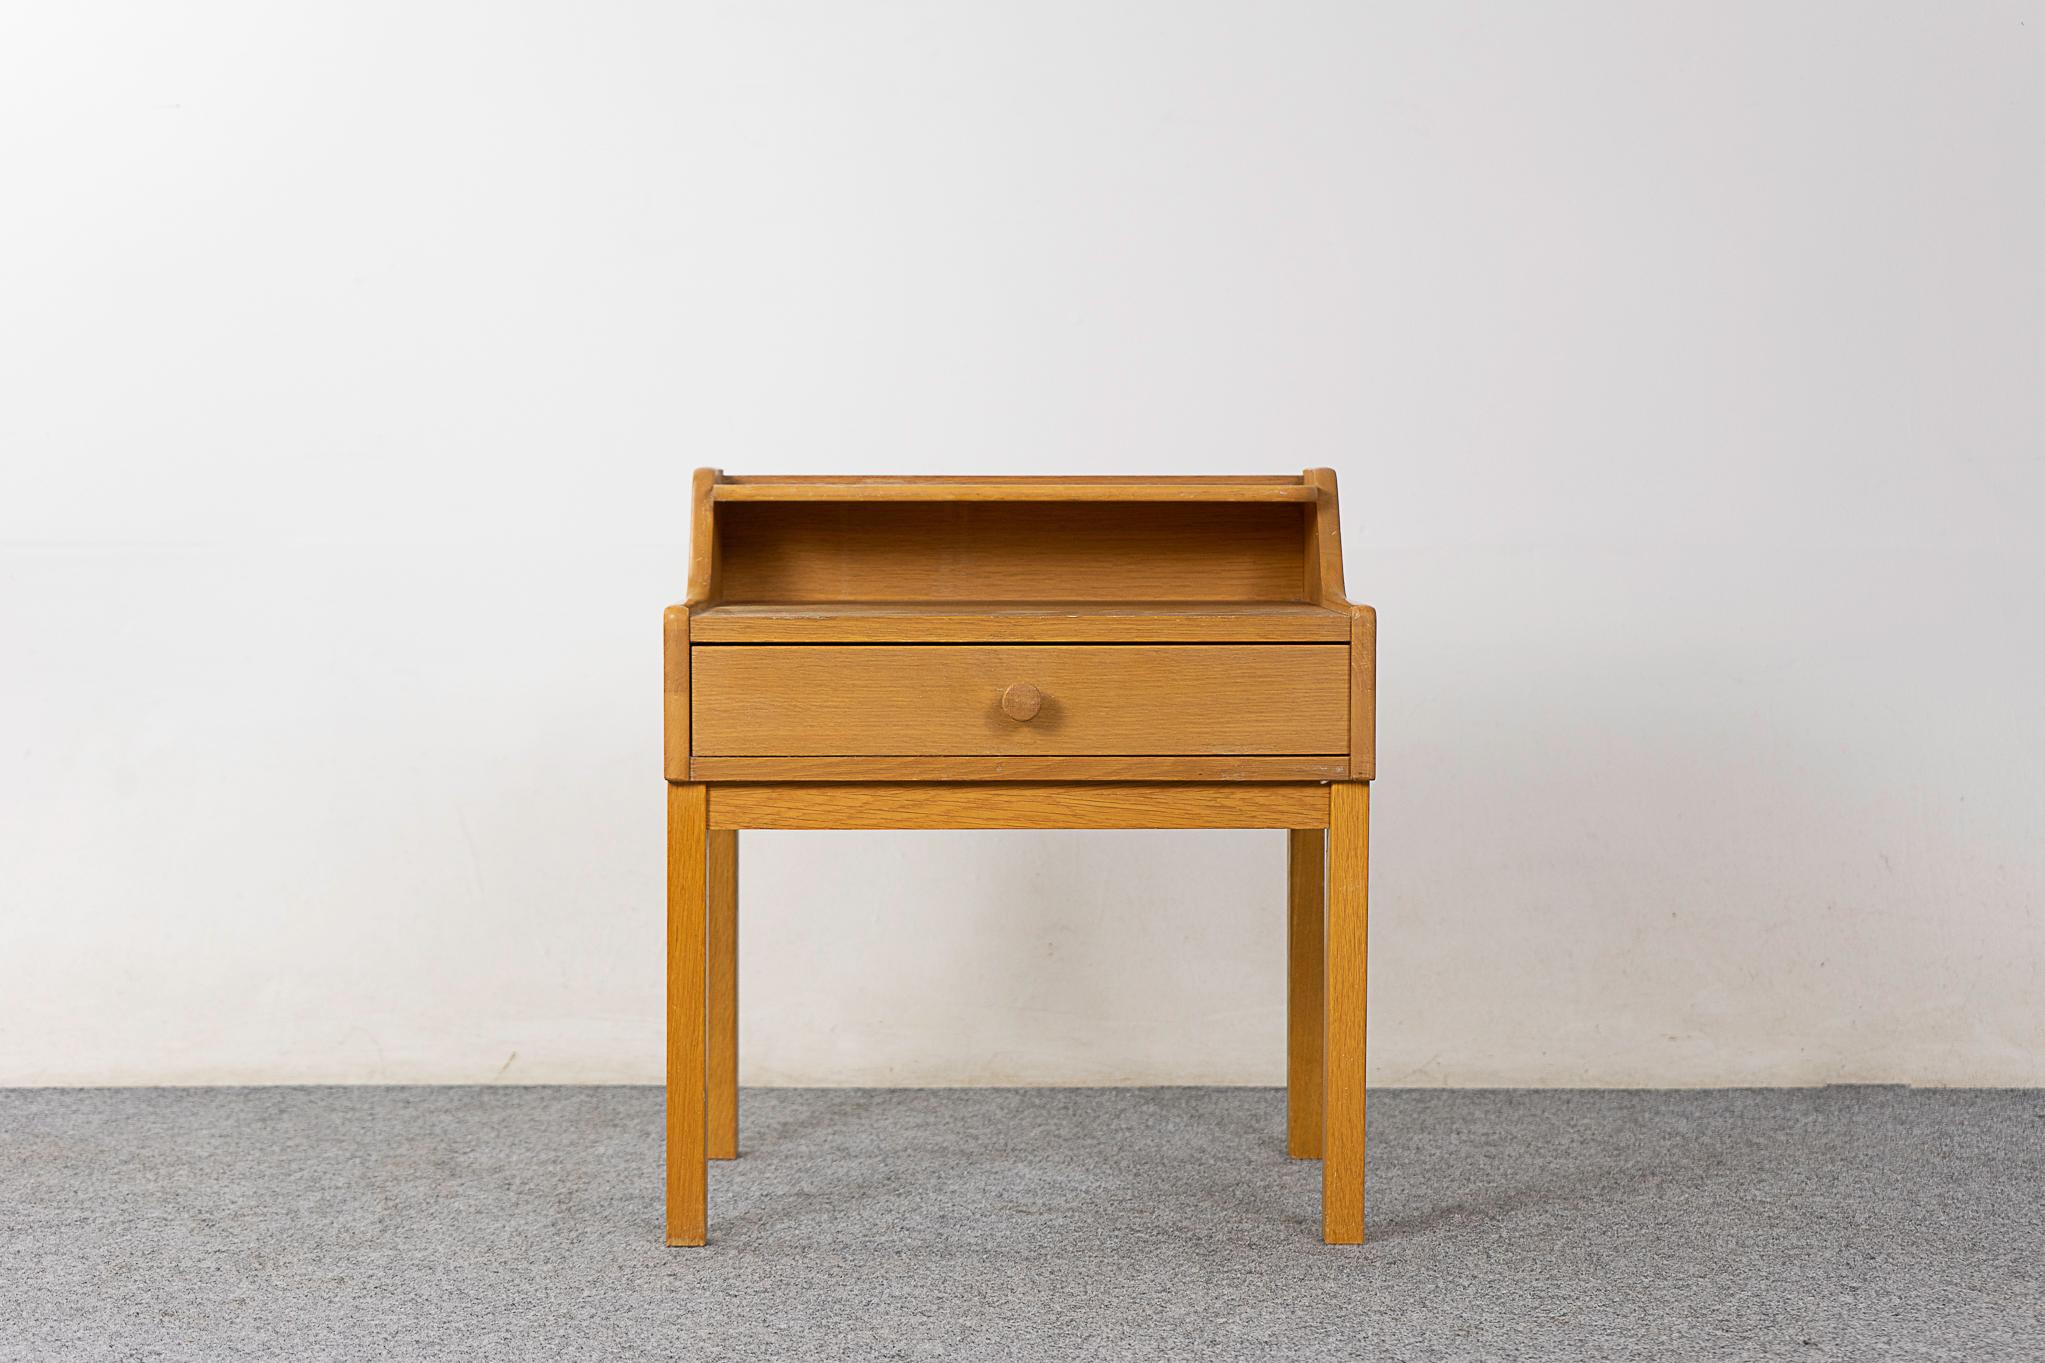 Oak mid-century bedside, circa 1960's. Nice compact size with a sleek drawer.